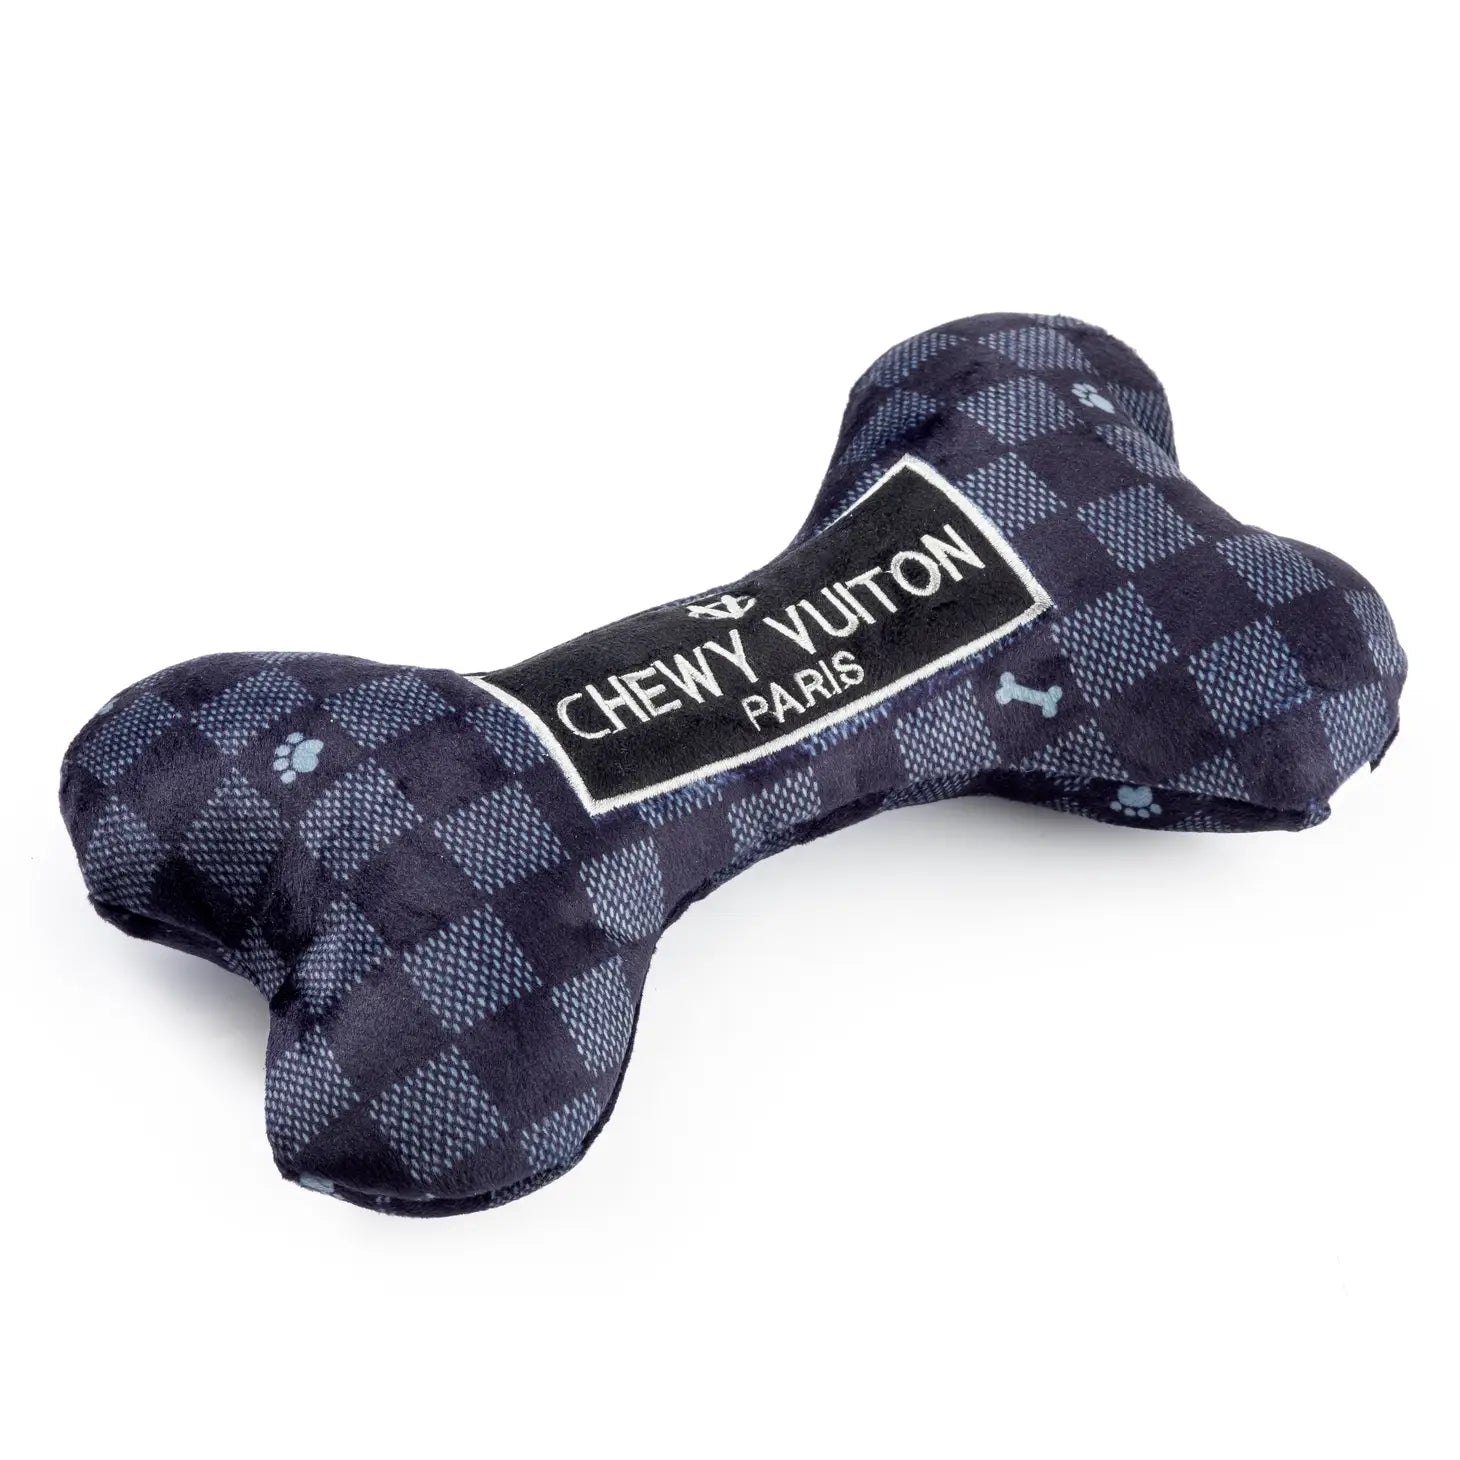 Haute Diggity Dog Checker Chewy Vuiton Loafer Dog Toy - Black